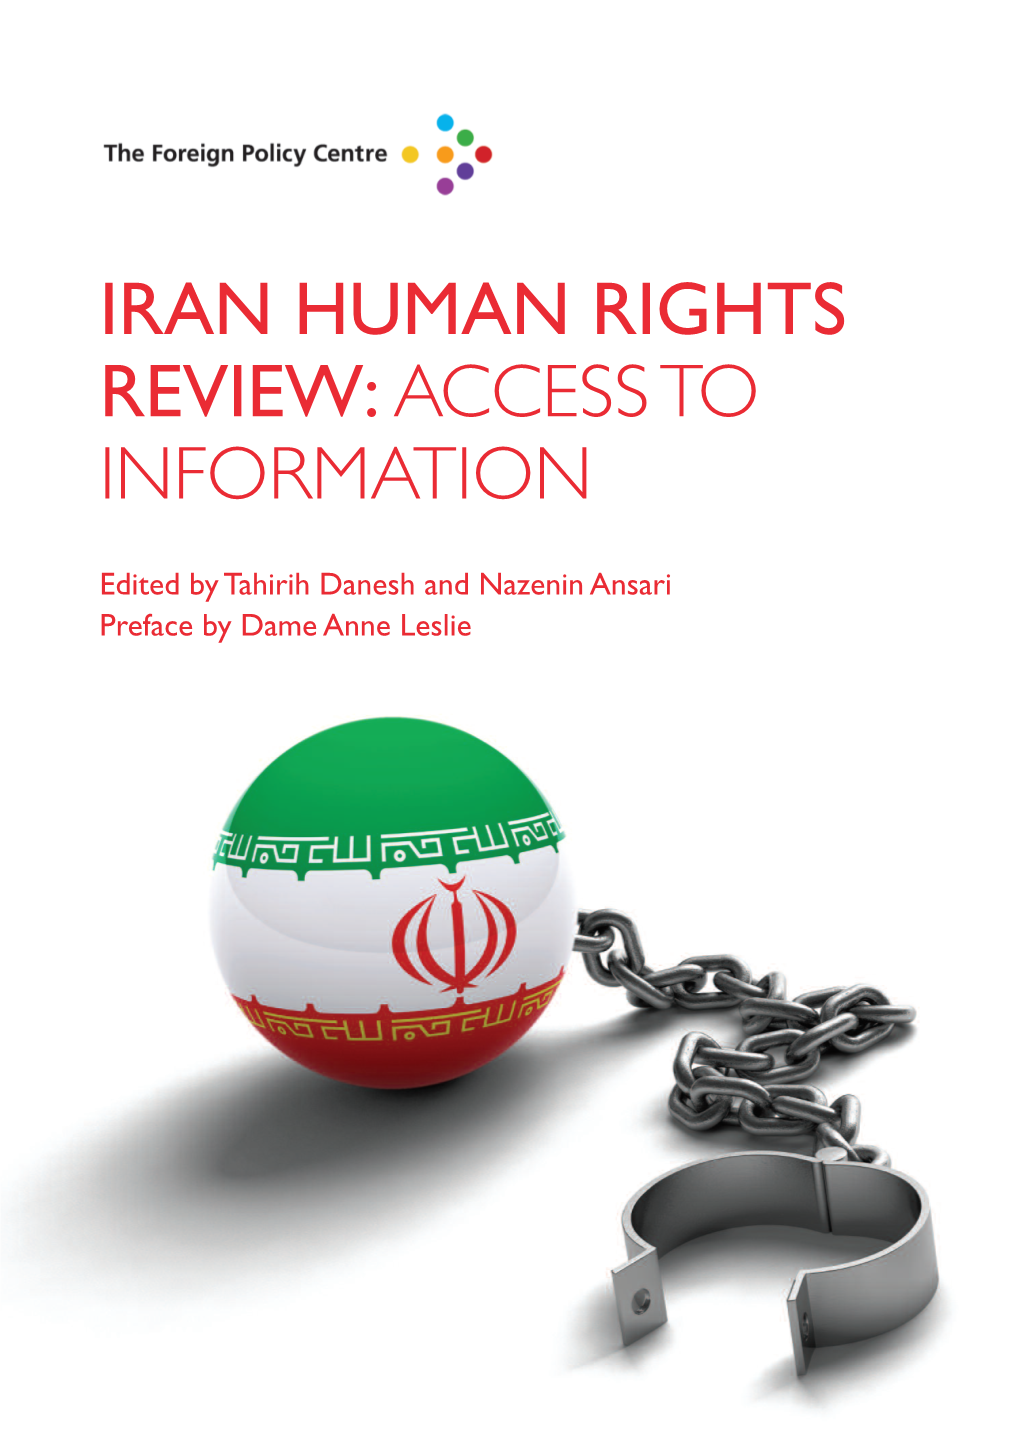 Iran Human Rights Review: Access to Information